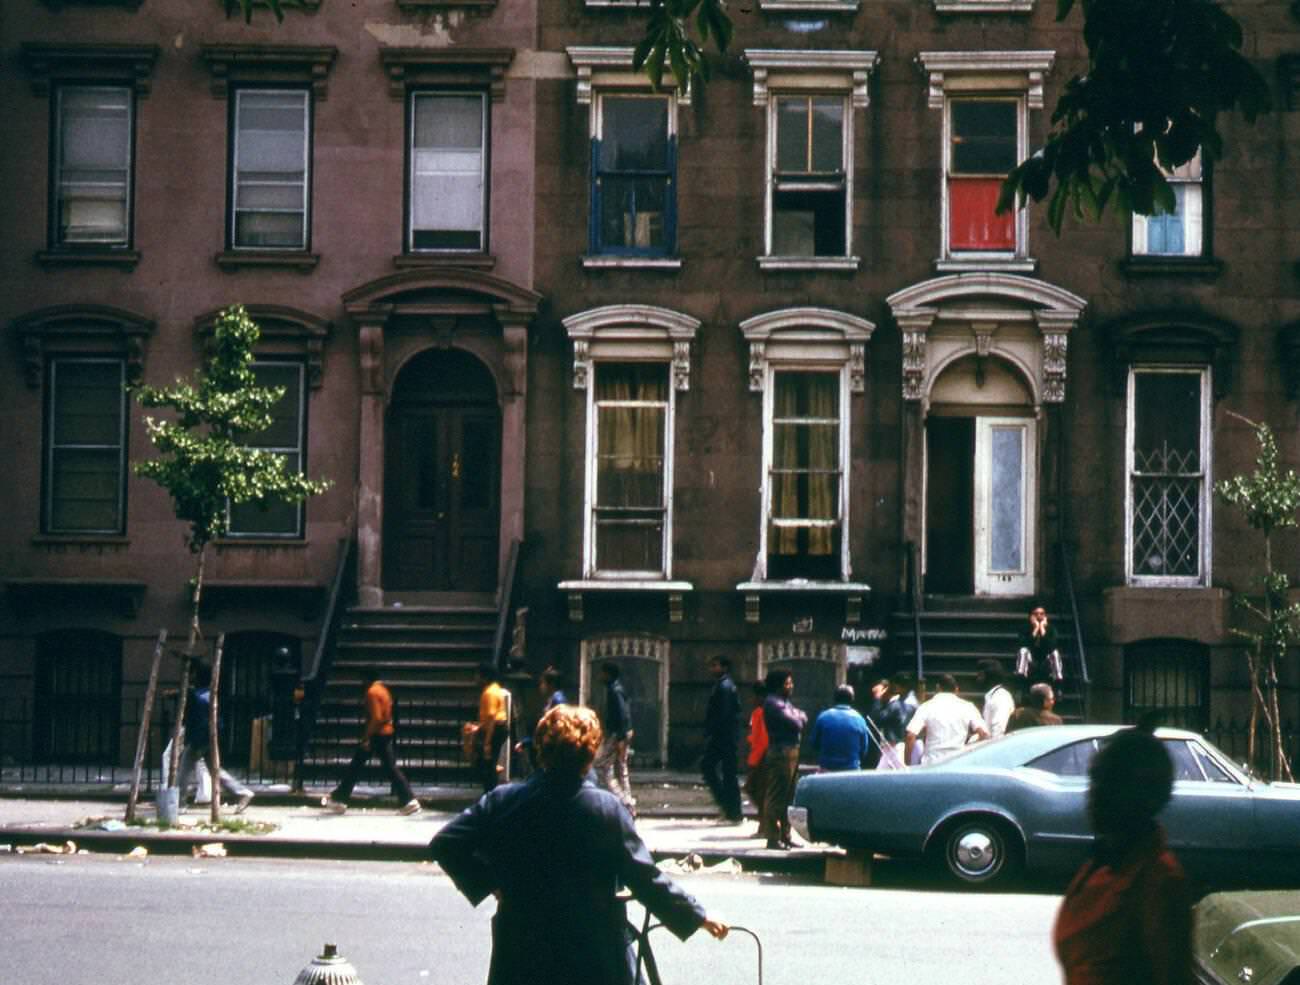 Apartment House Across From Fort Green Park, Brooklyn, 1974.